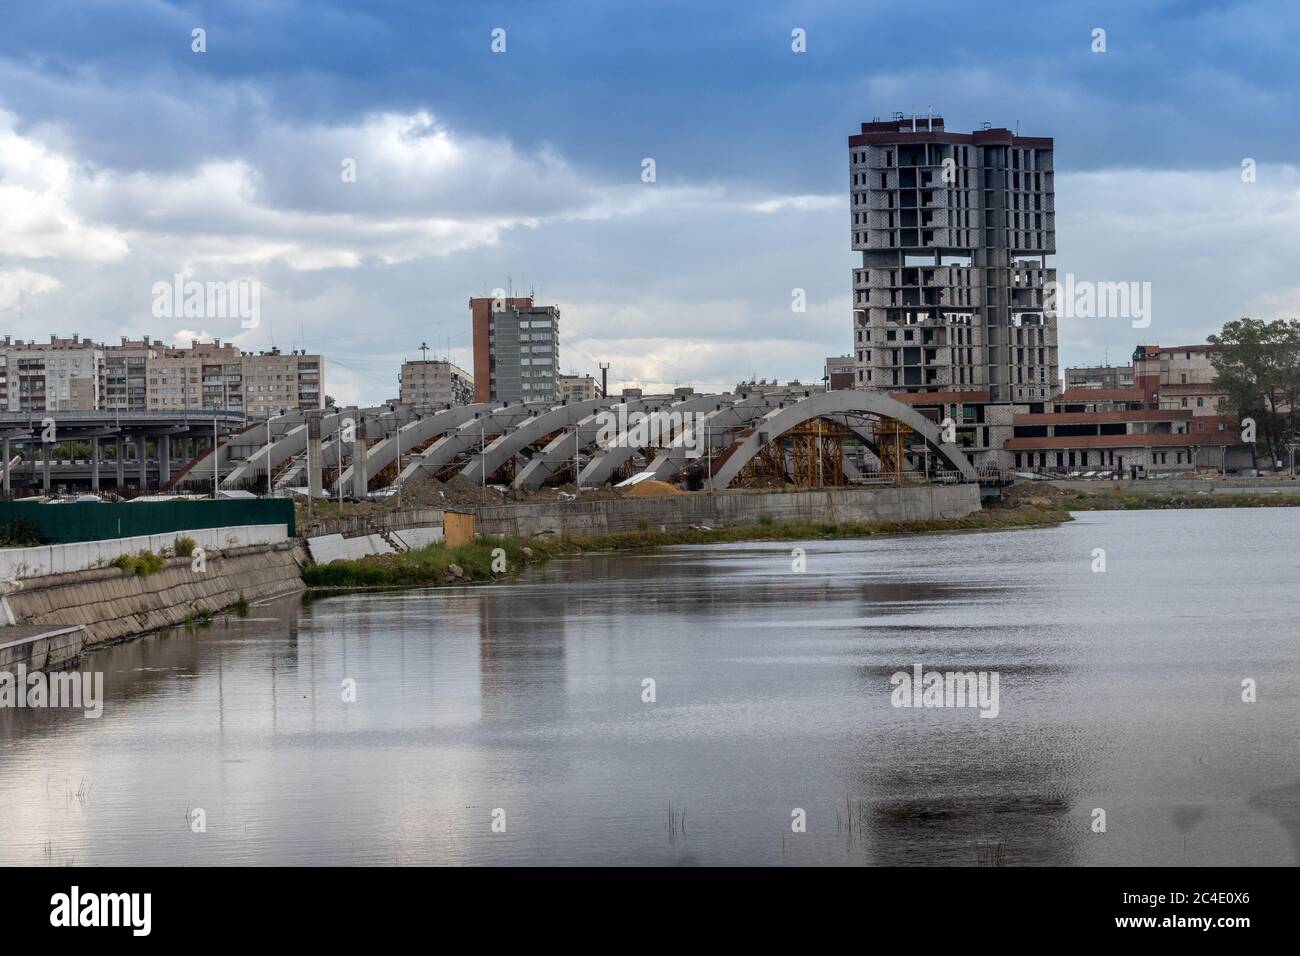 A high-rise building under construction on the banks of the Miass River in Chelyabinsk, Russia. Stock Photo